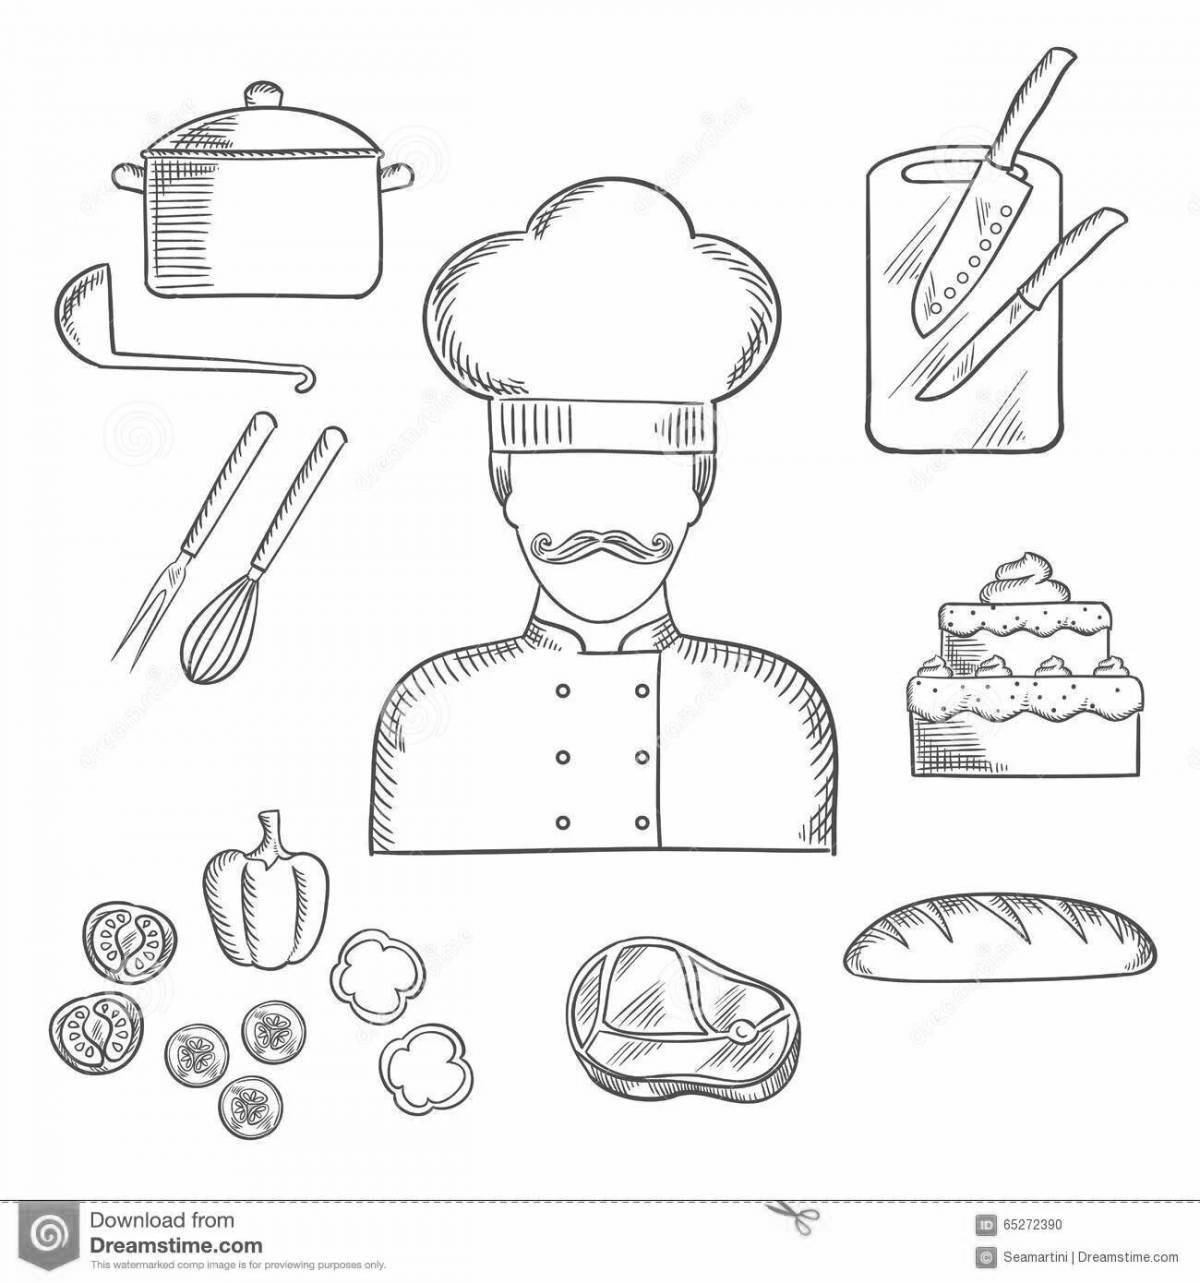 Playful cook tools coloring page